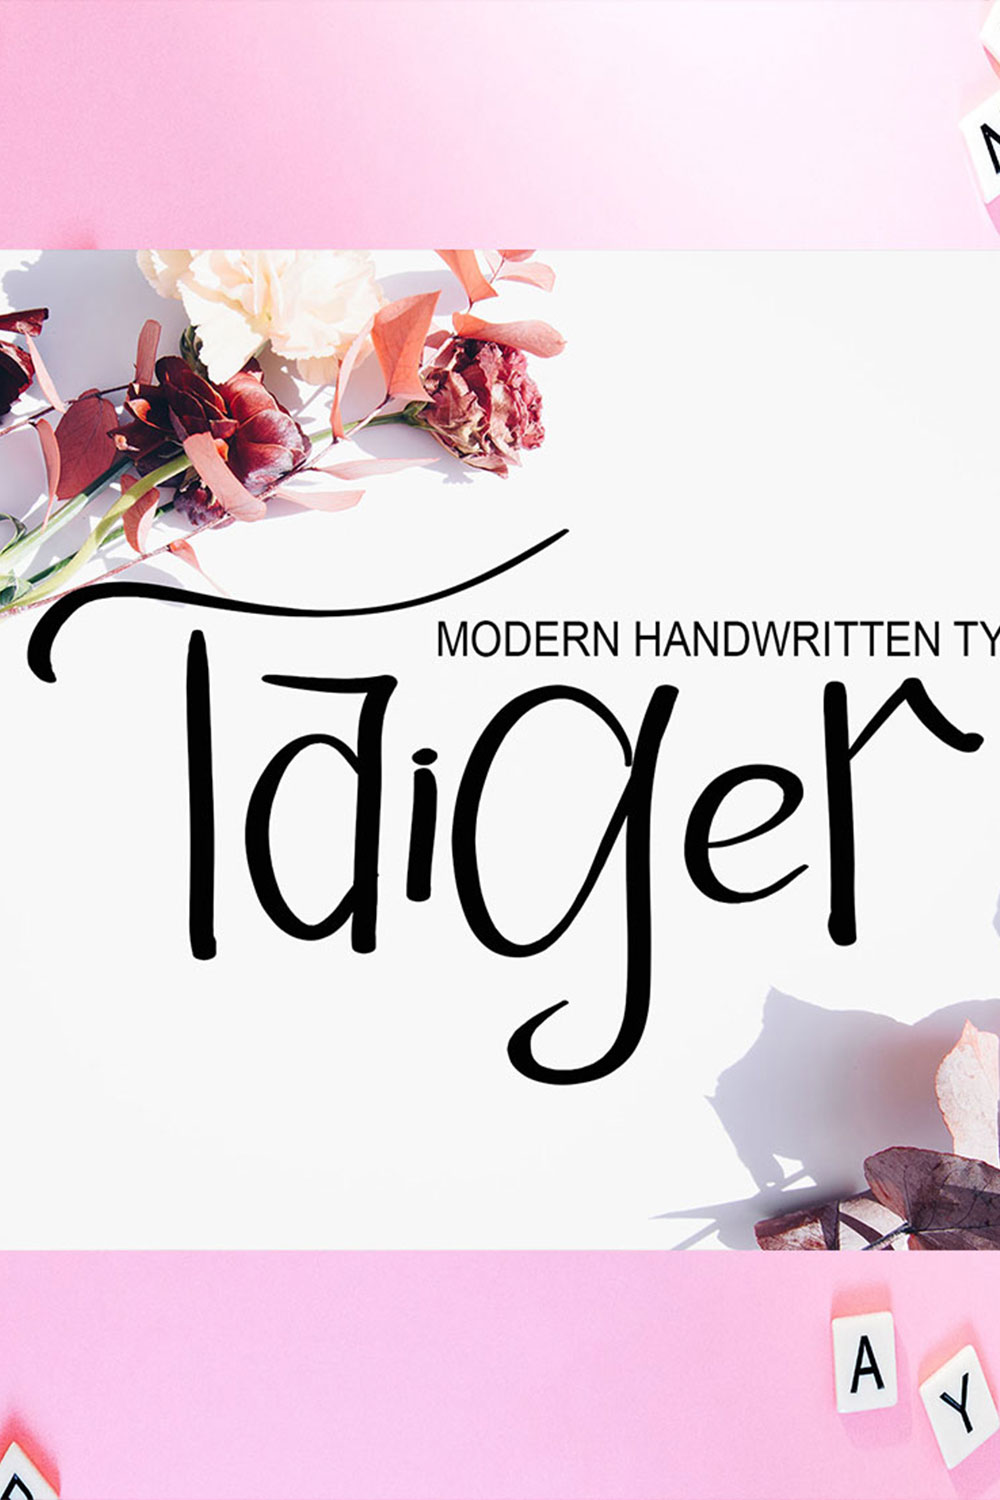 An image with text showing off the beautiful Taiger font.